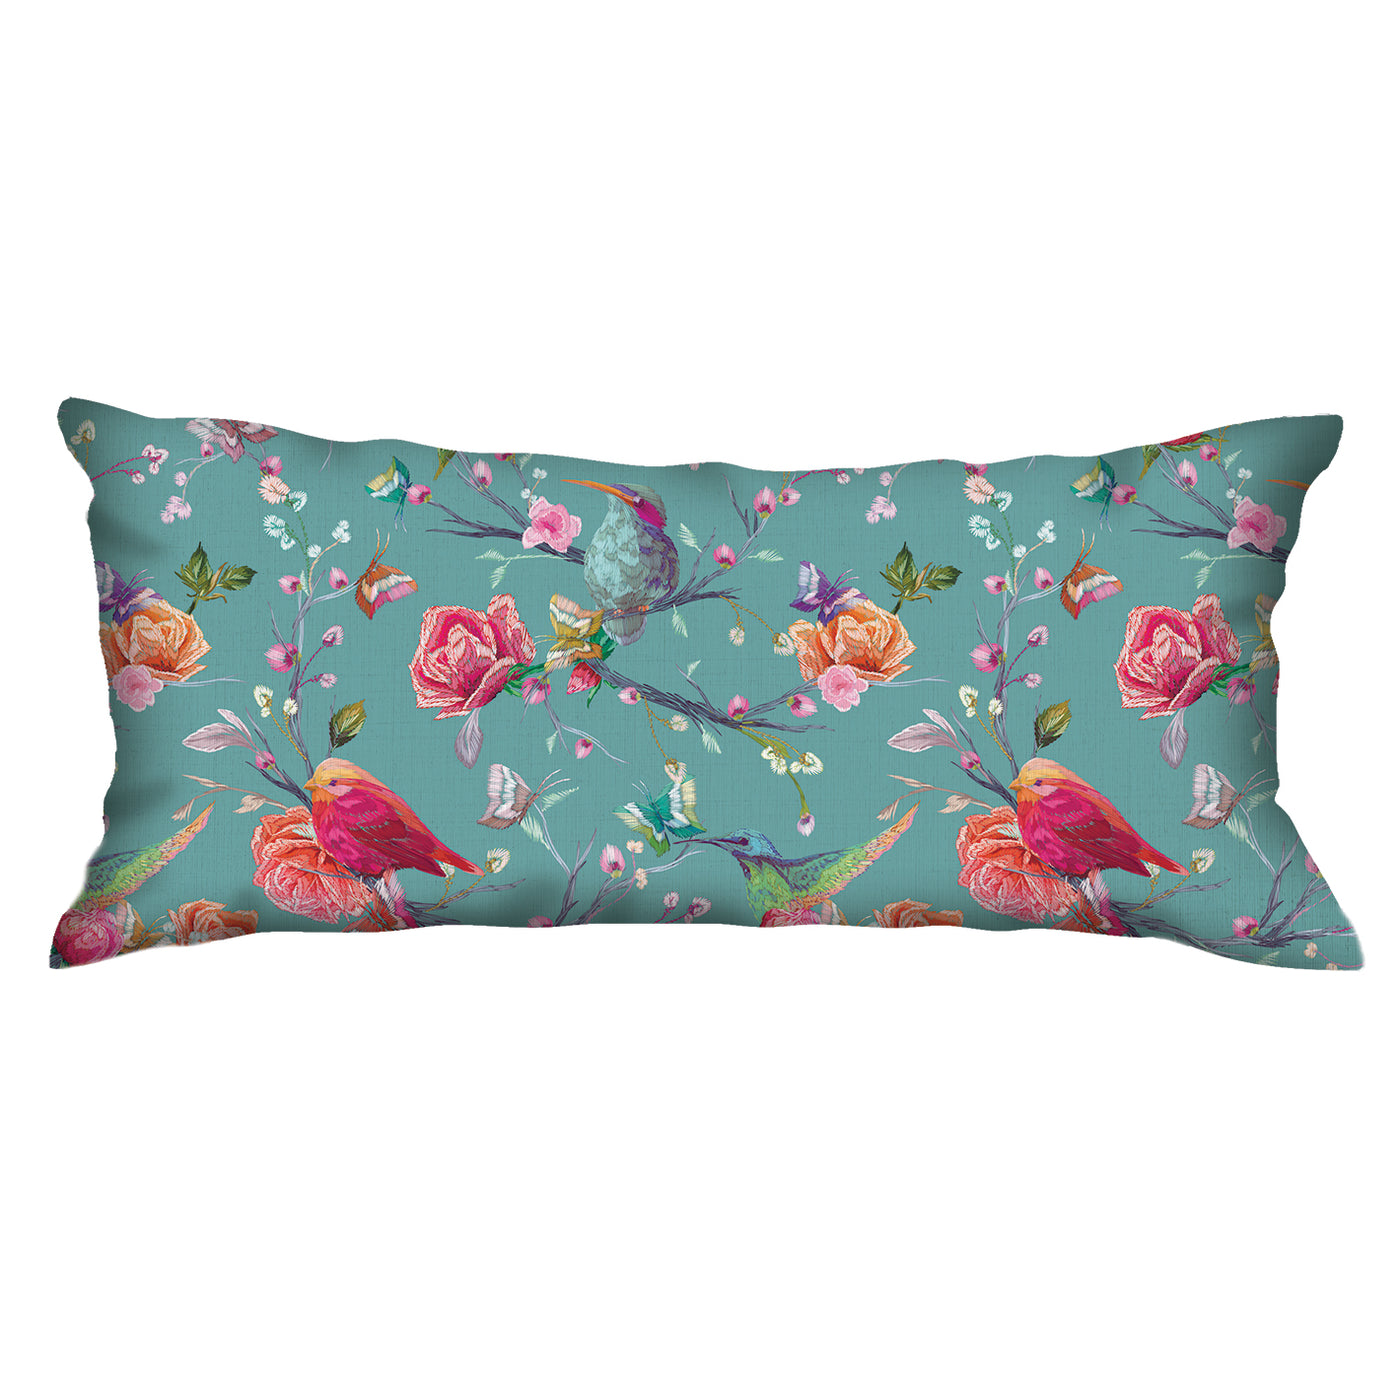 Scatter Cushion - Delicate Floral pattern - Turquoise